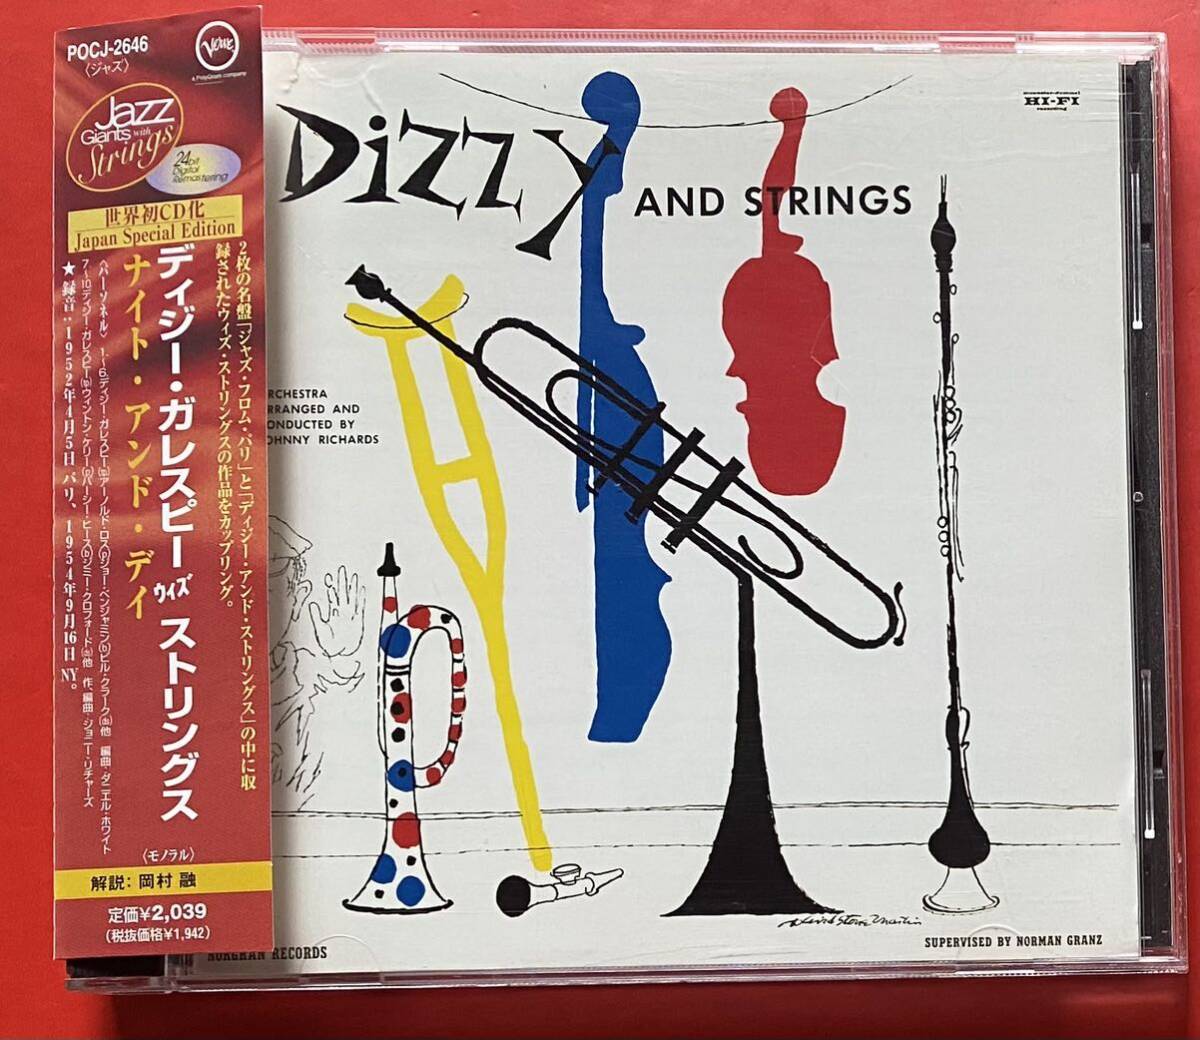 【CD】ディジー・ガレスピー「Dizzy Gillespie and Strings」国内盤 [10090330]_画像1